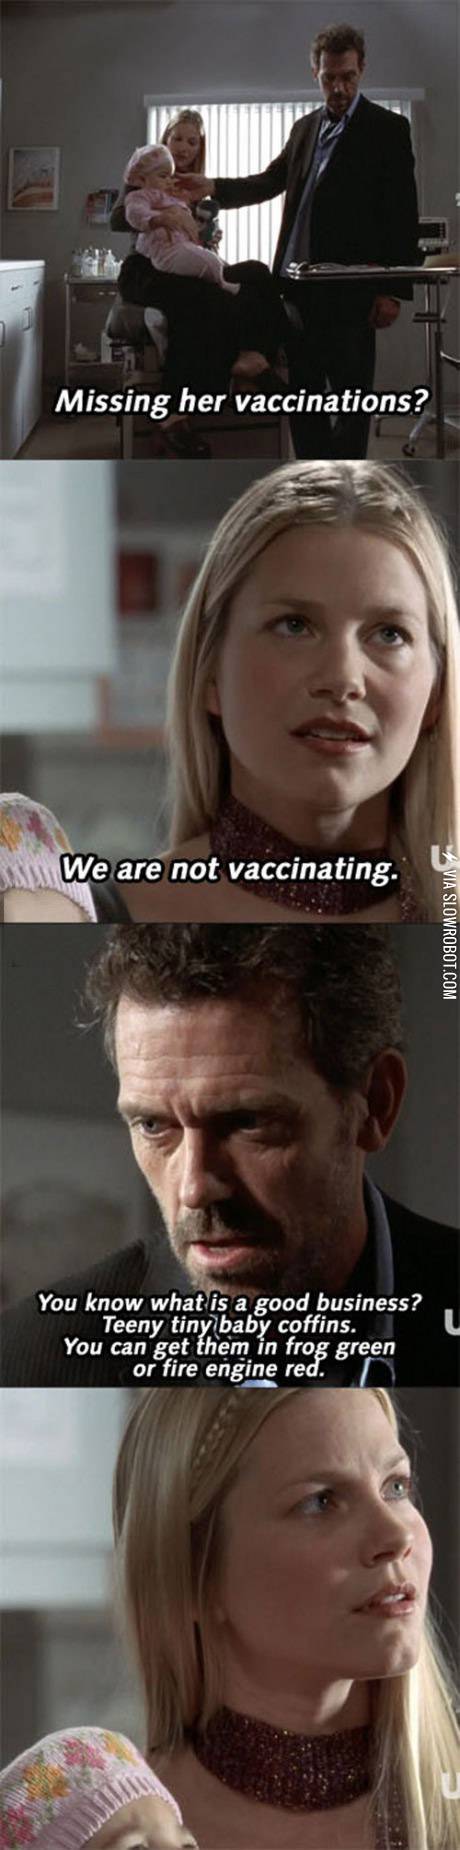 Vaccinations+are+necessary+people%21